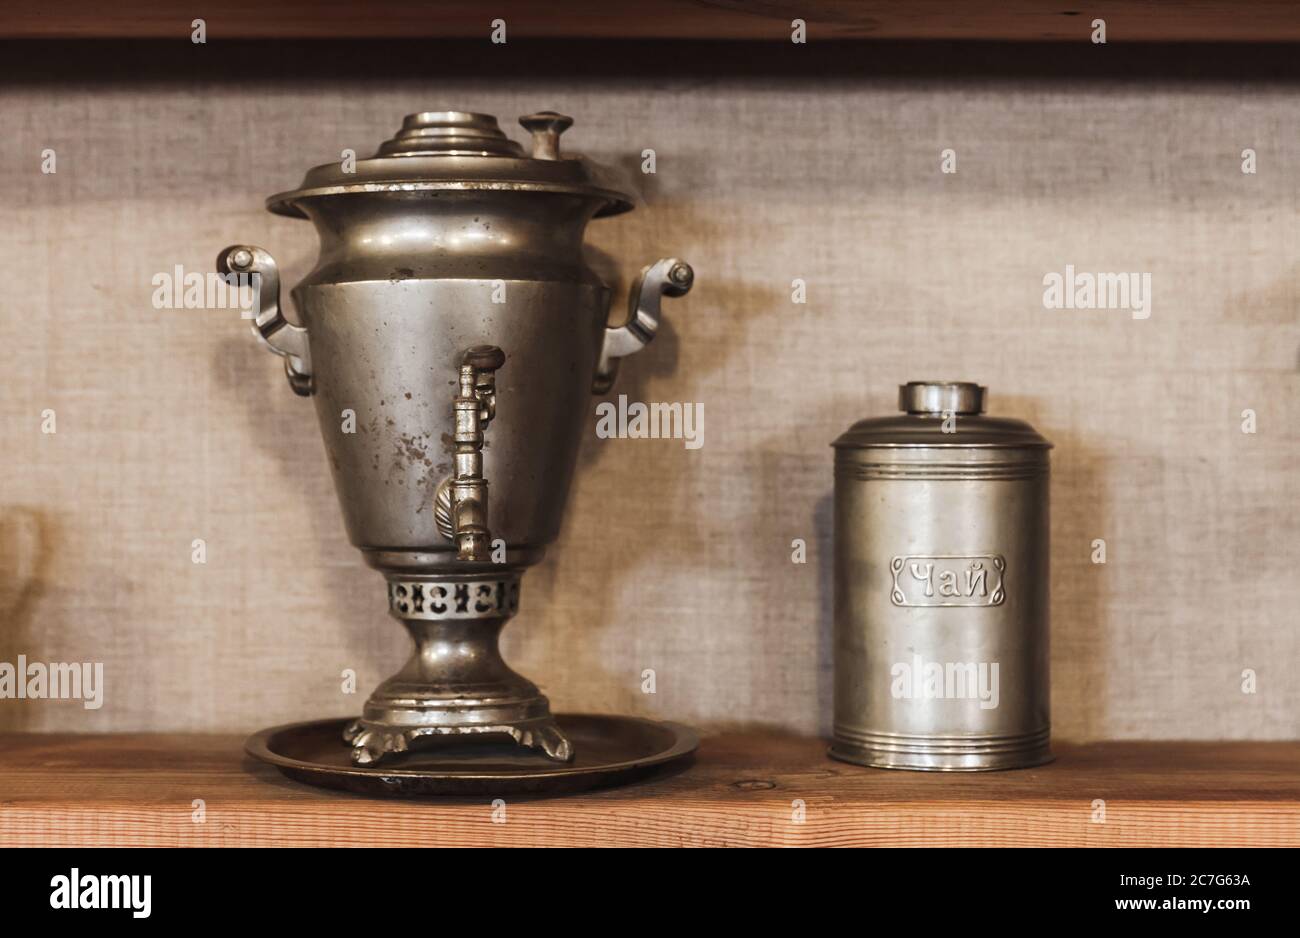 Traditional vintage Russian Samovar, a metal container used to heat and boil water for tea is standing near metal jar. Russian text on the container m Stock Photo